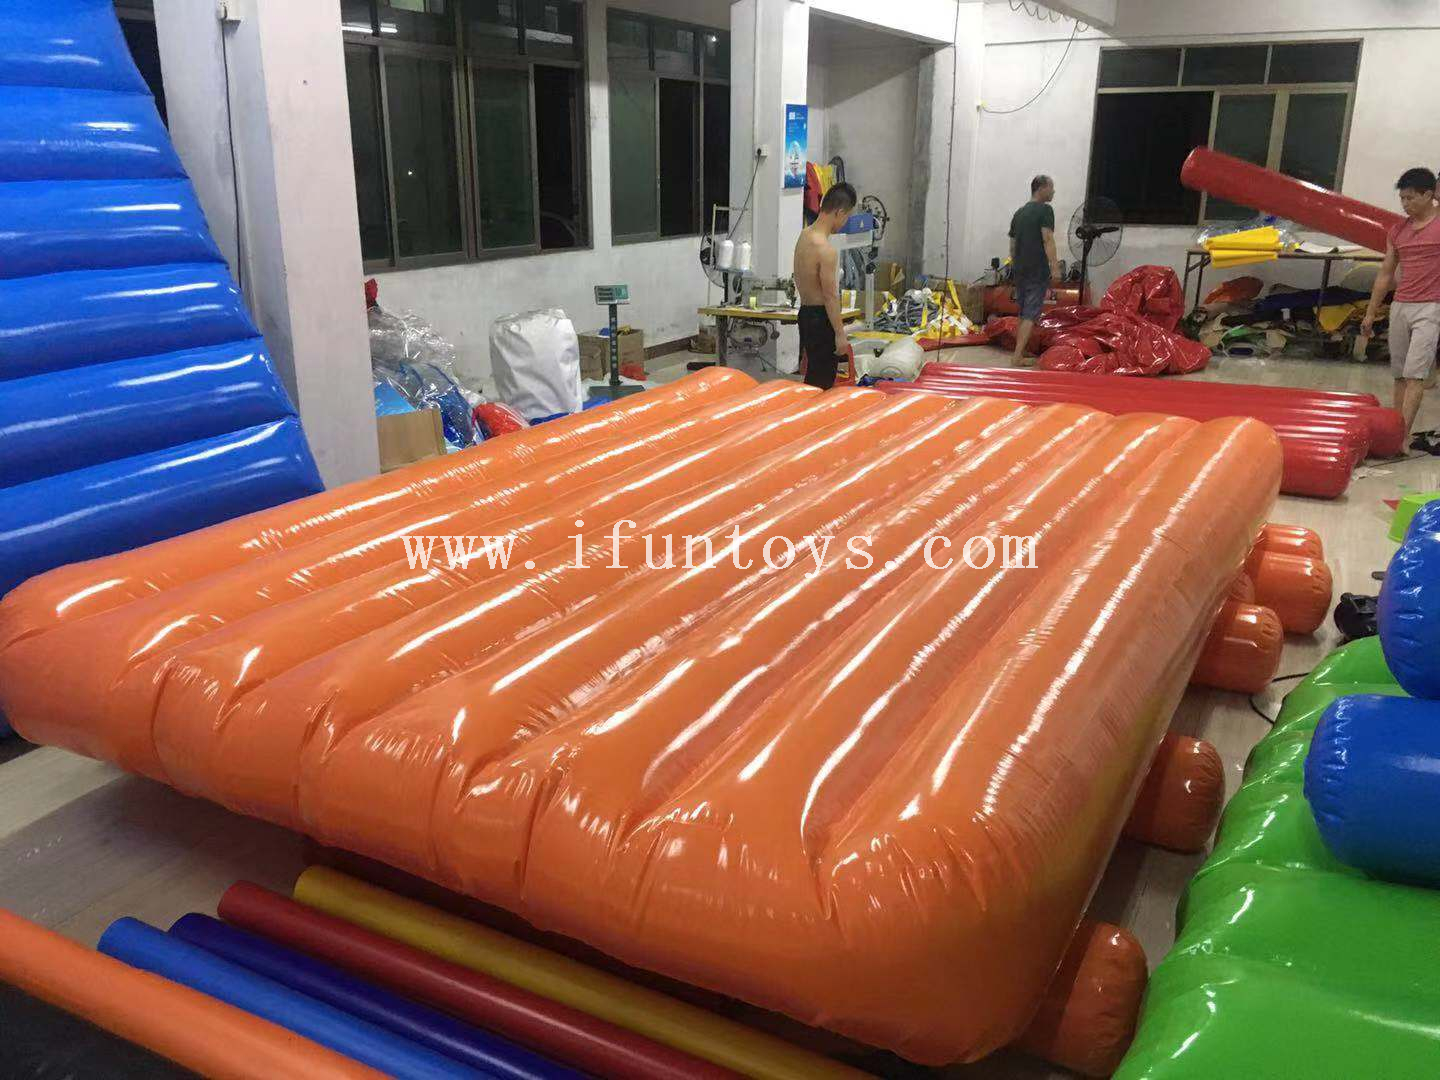 Hot sale inflatable wheel rolling for team building game/inflatable sports game/inflatable corporate game for kids and adults